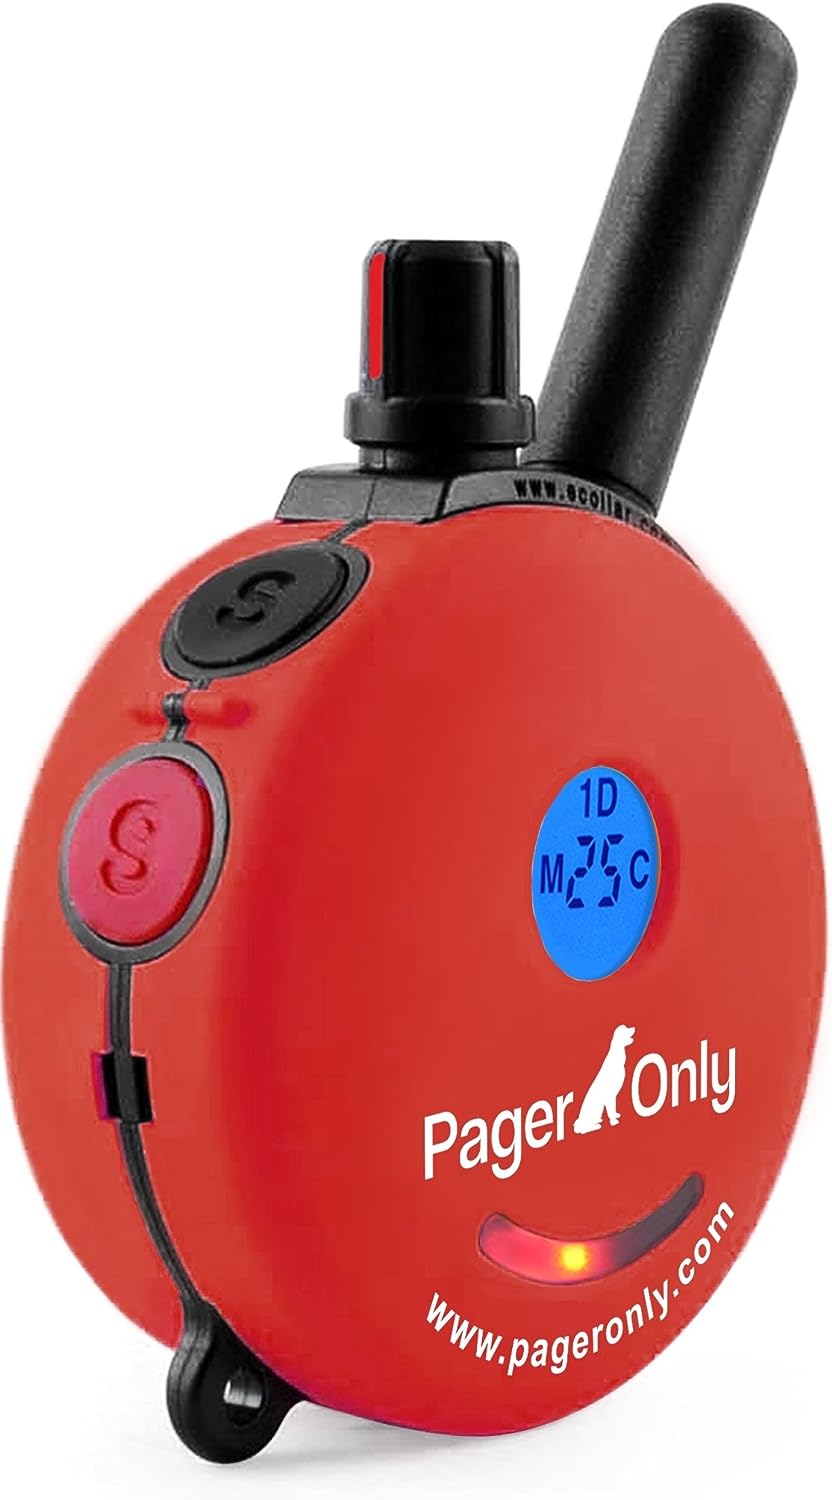 Educator Dog Training Pager Review